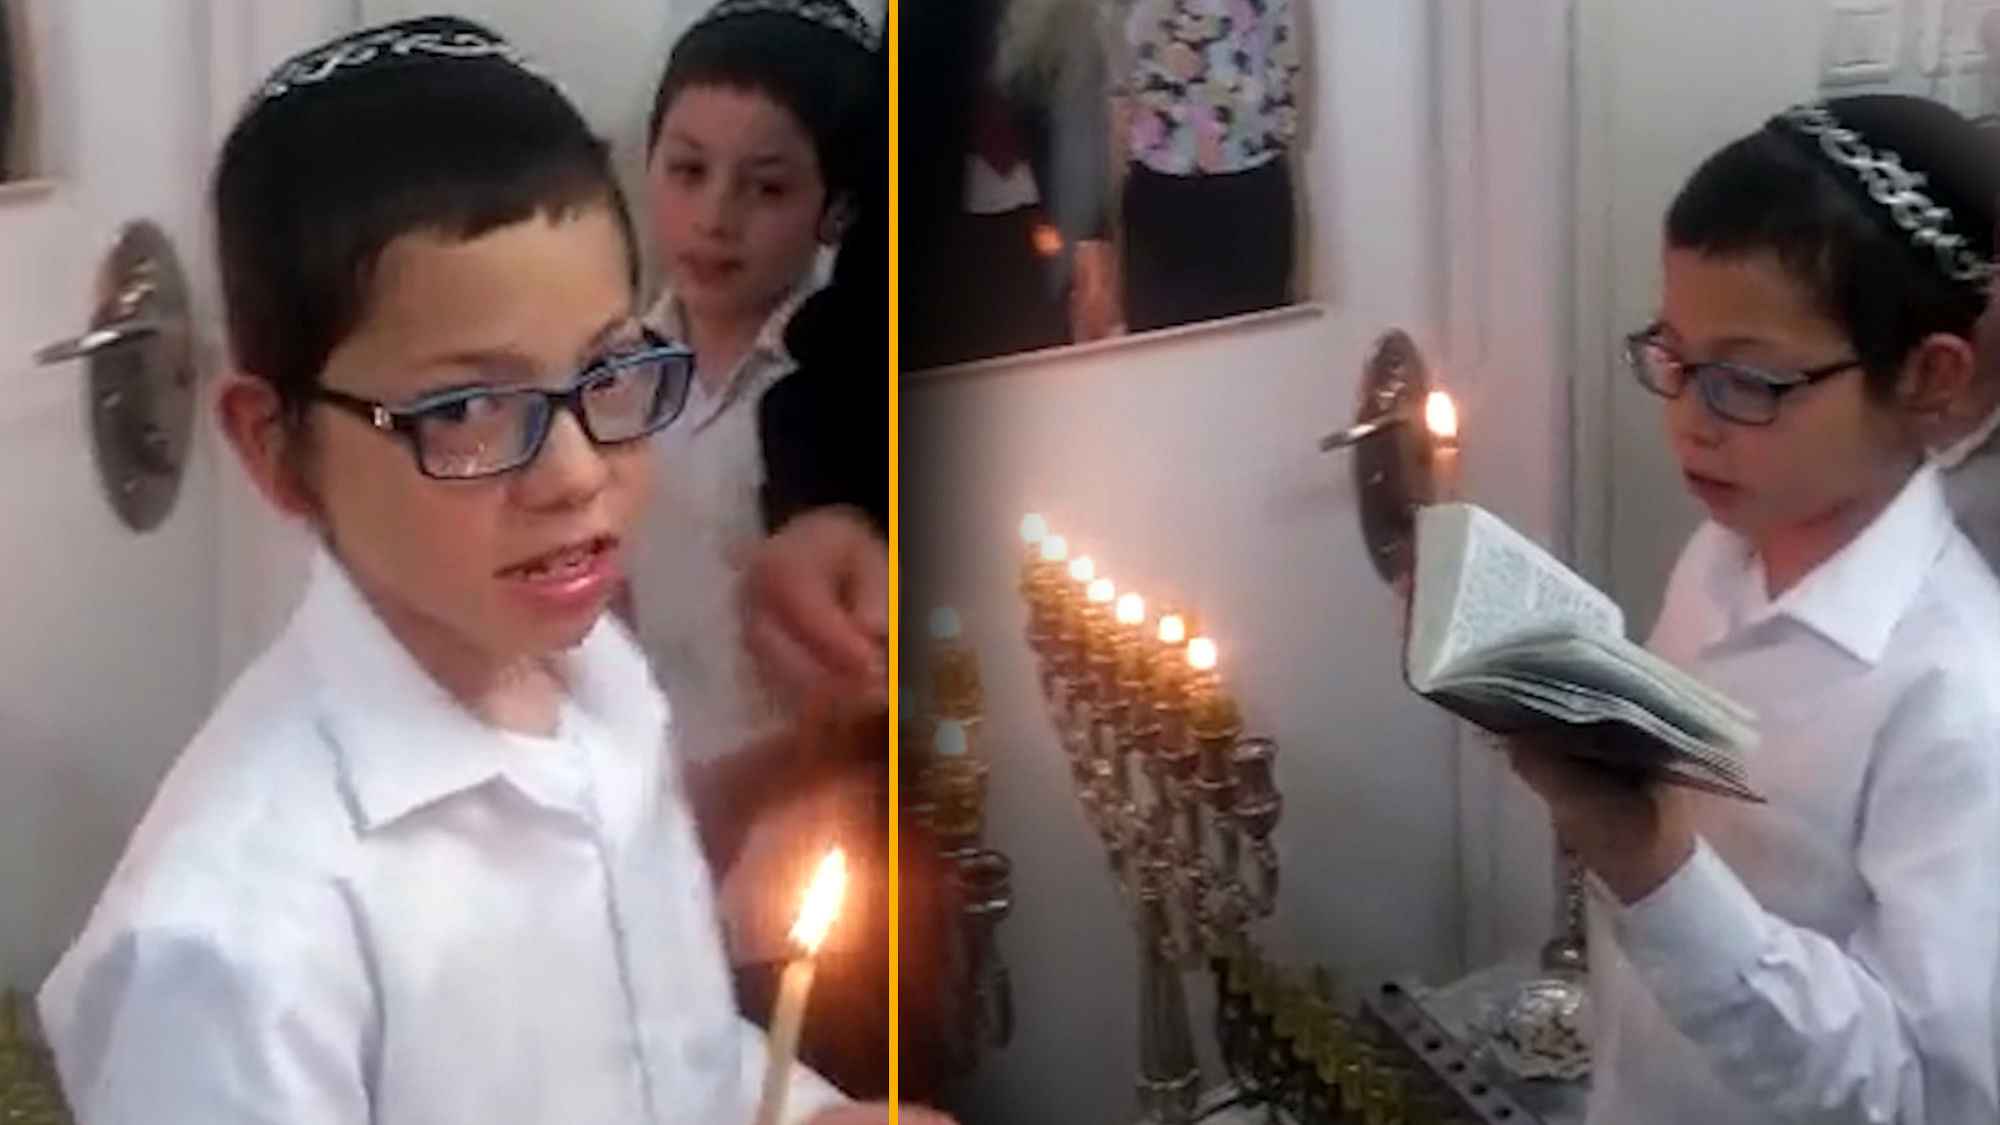 9-year-old Baby Moshe can be seen celebrating the Jewish festival of Hanukkah in Israel.&nbsp;